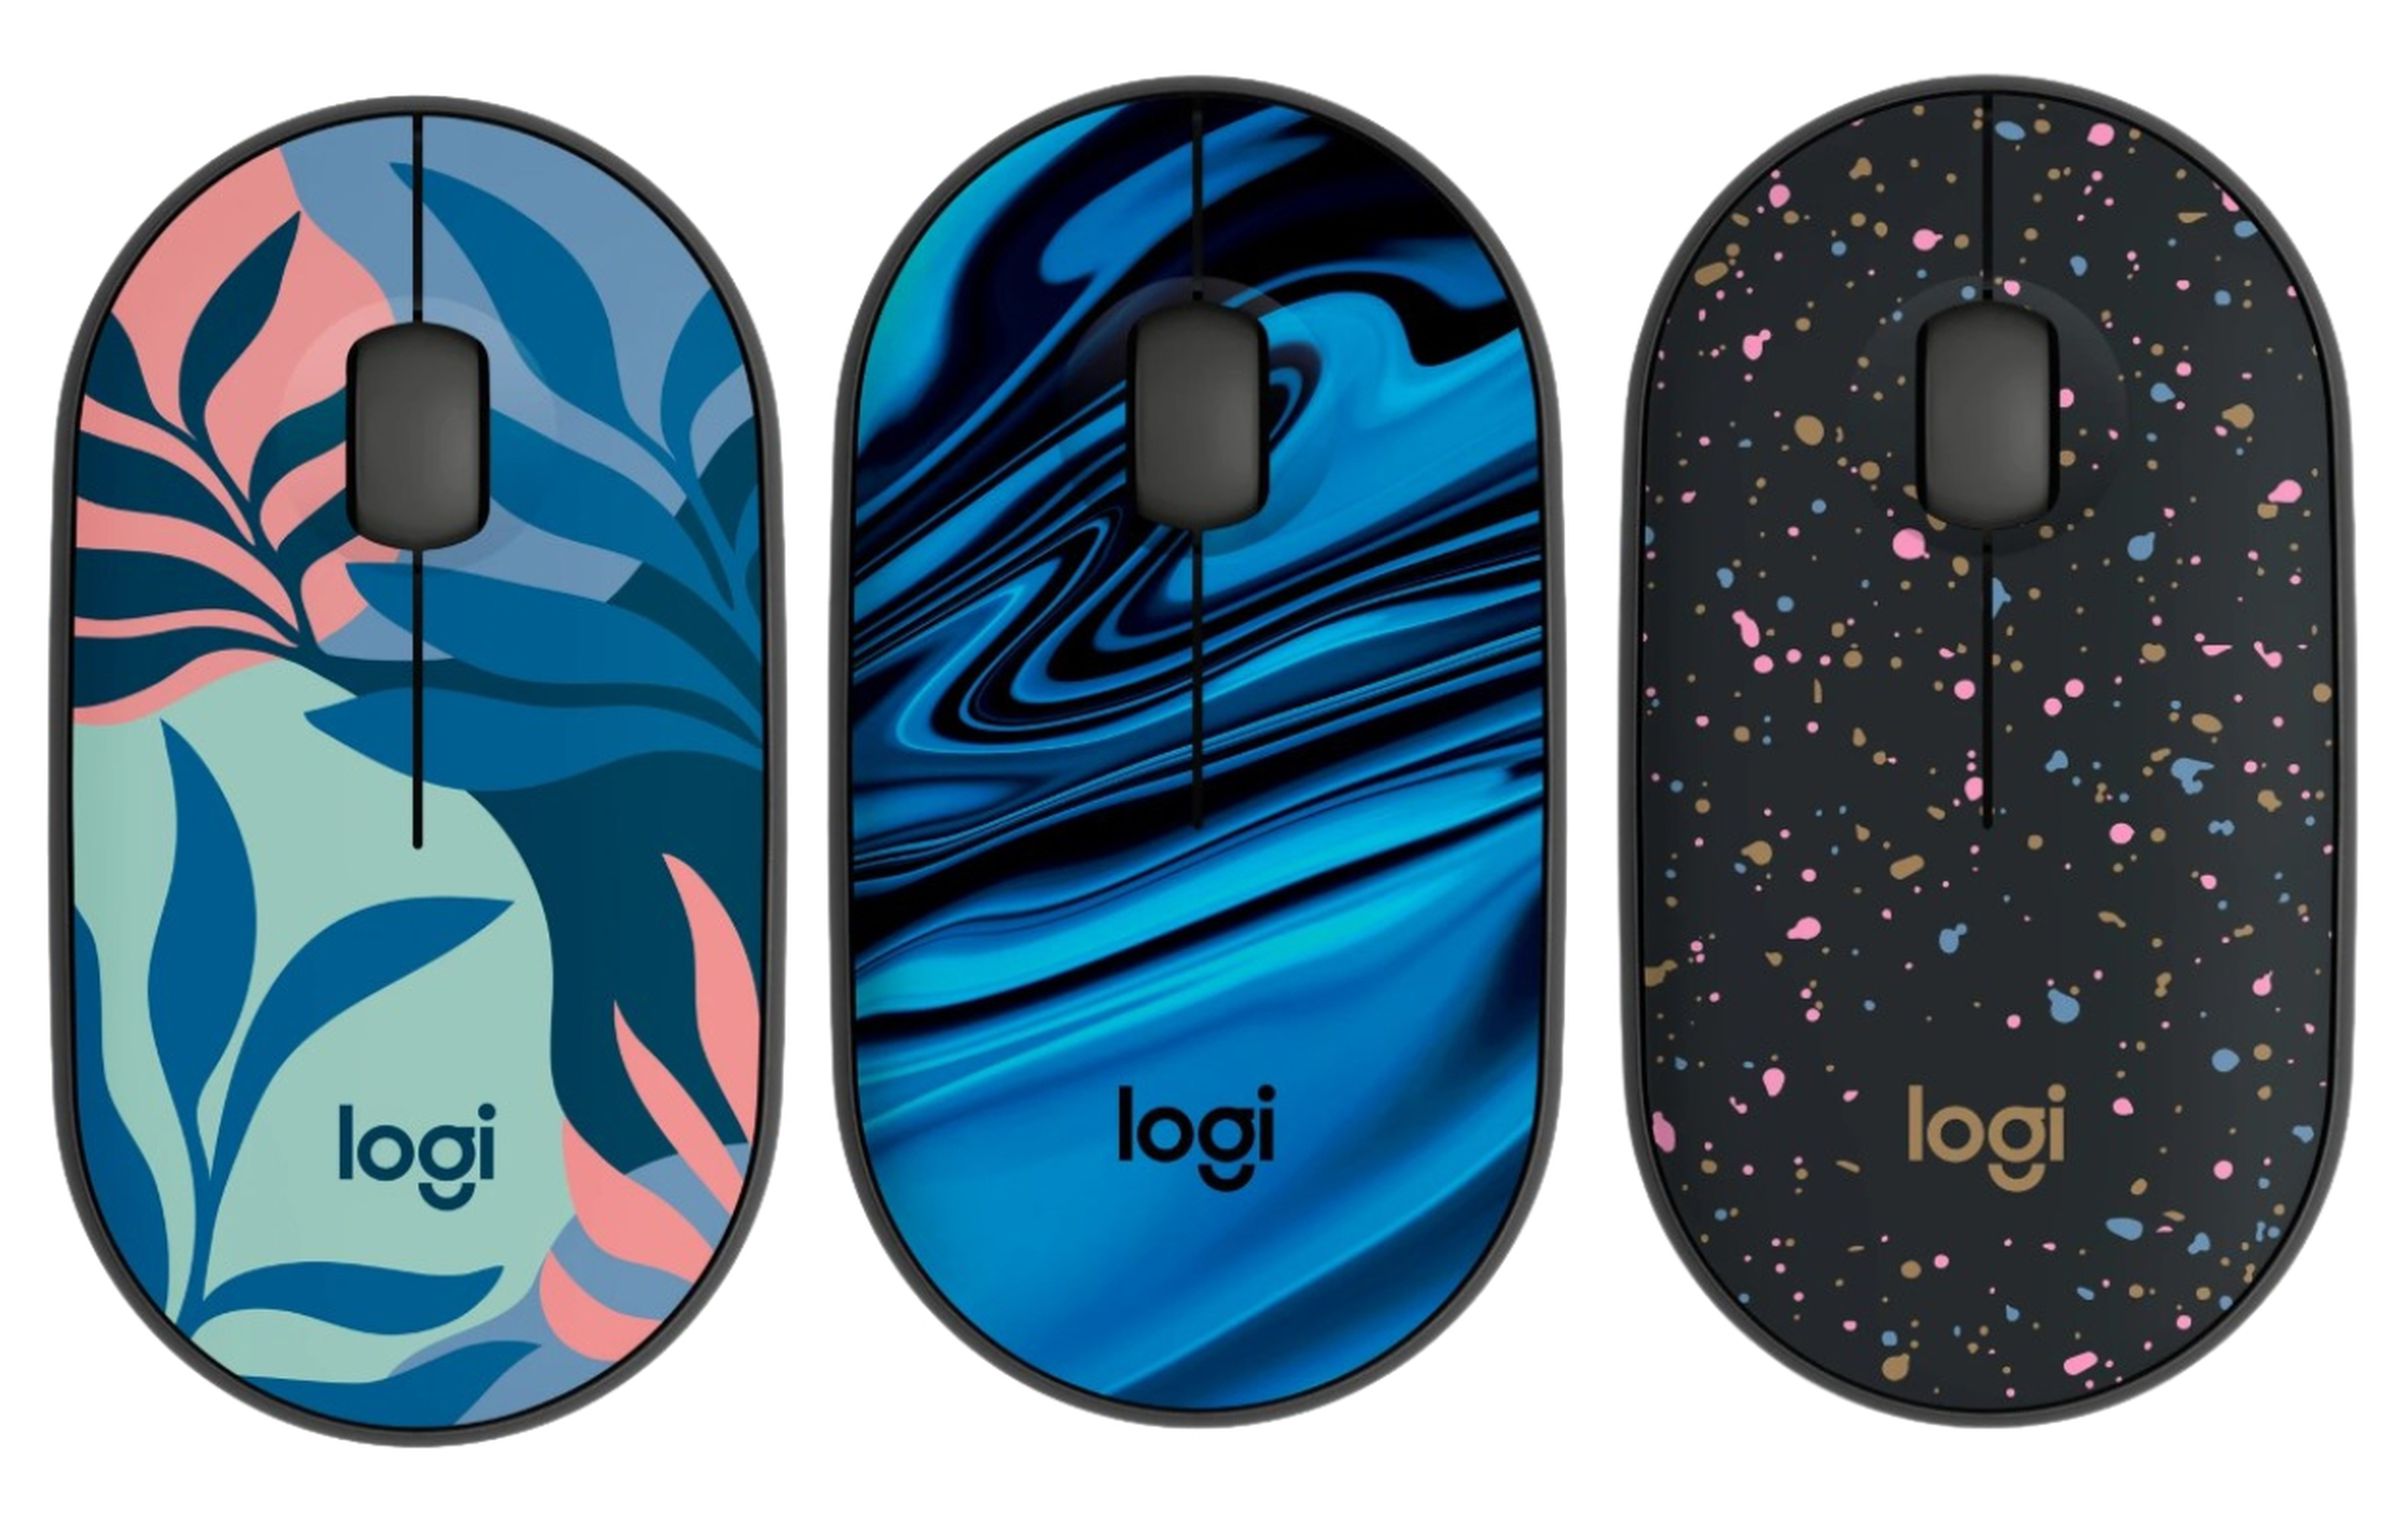 The Logitech M340 collection